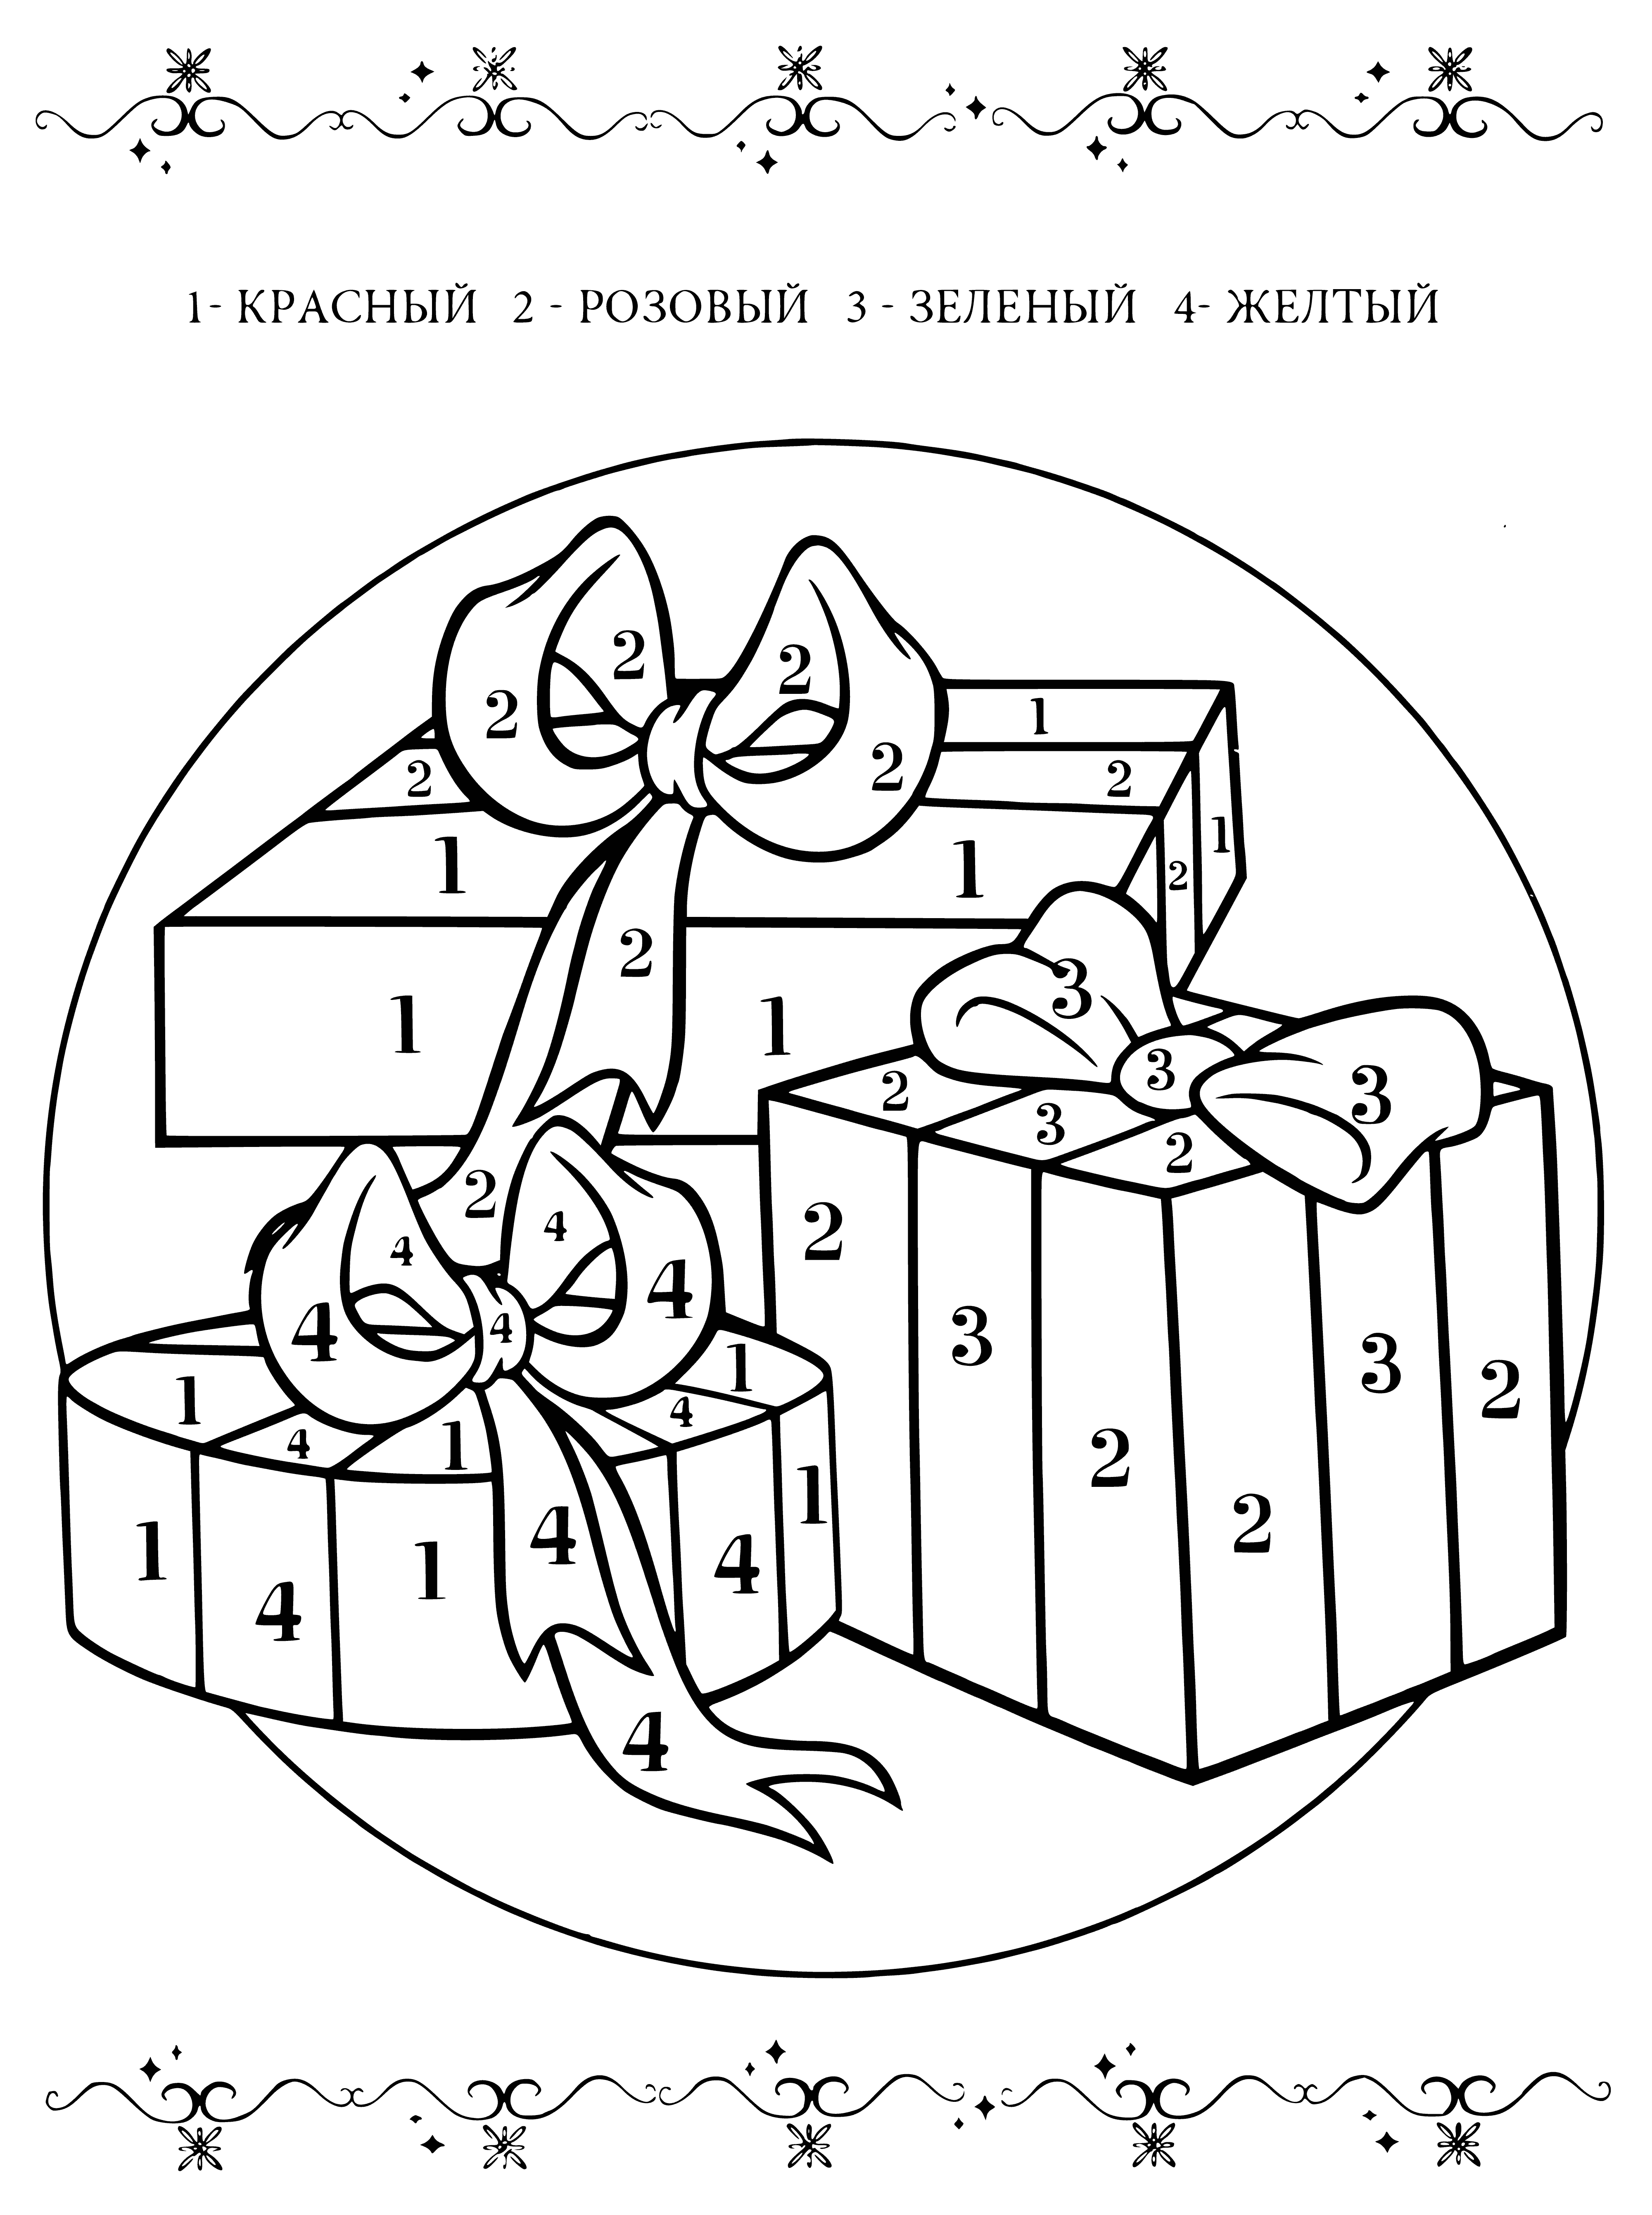 New Year gifts coloring page